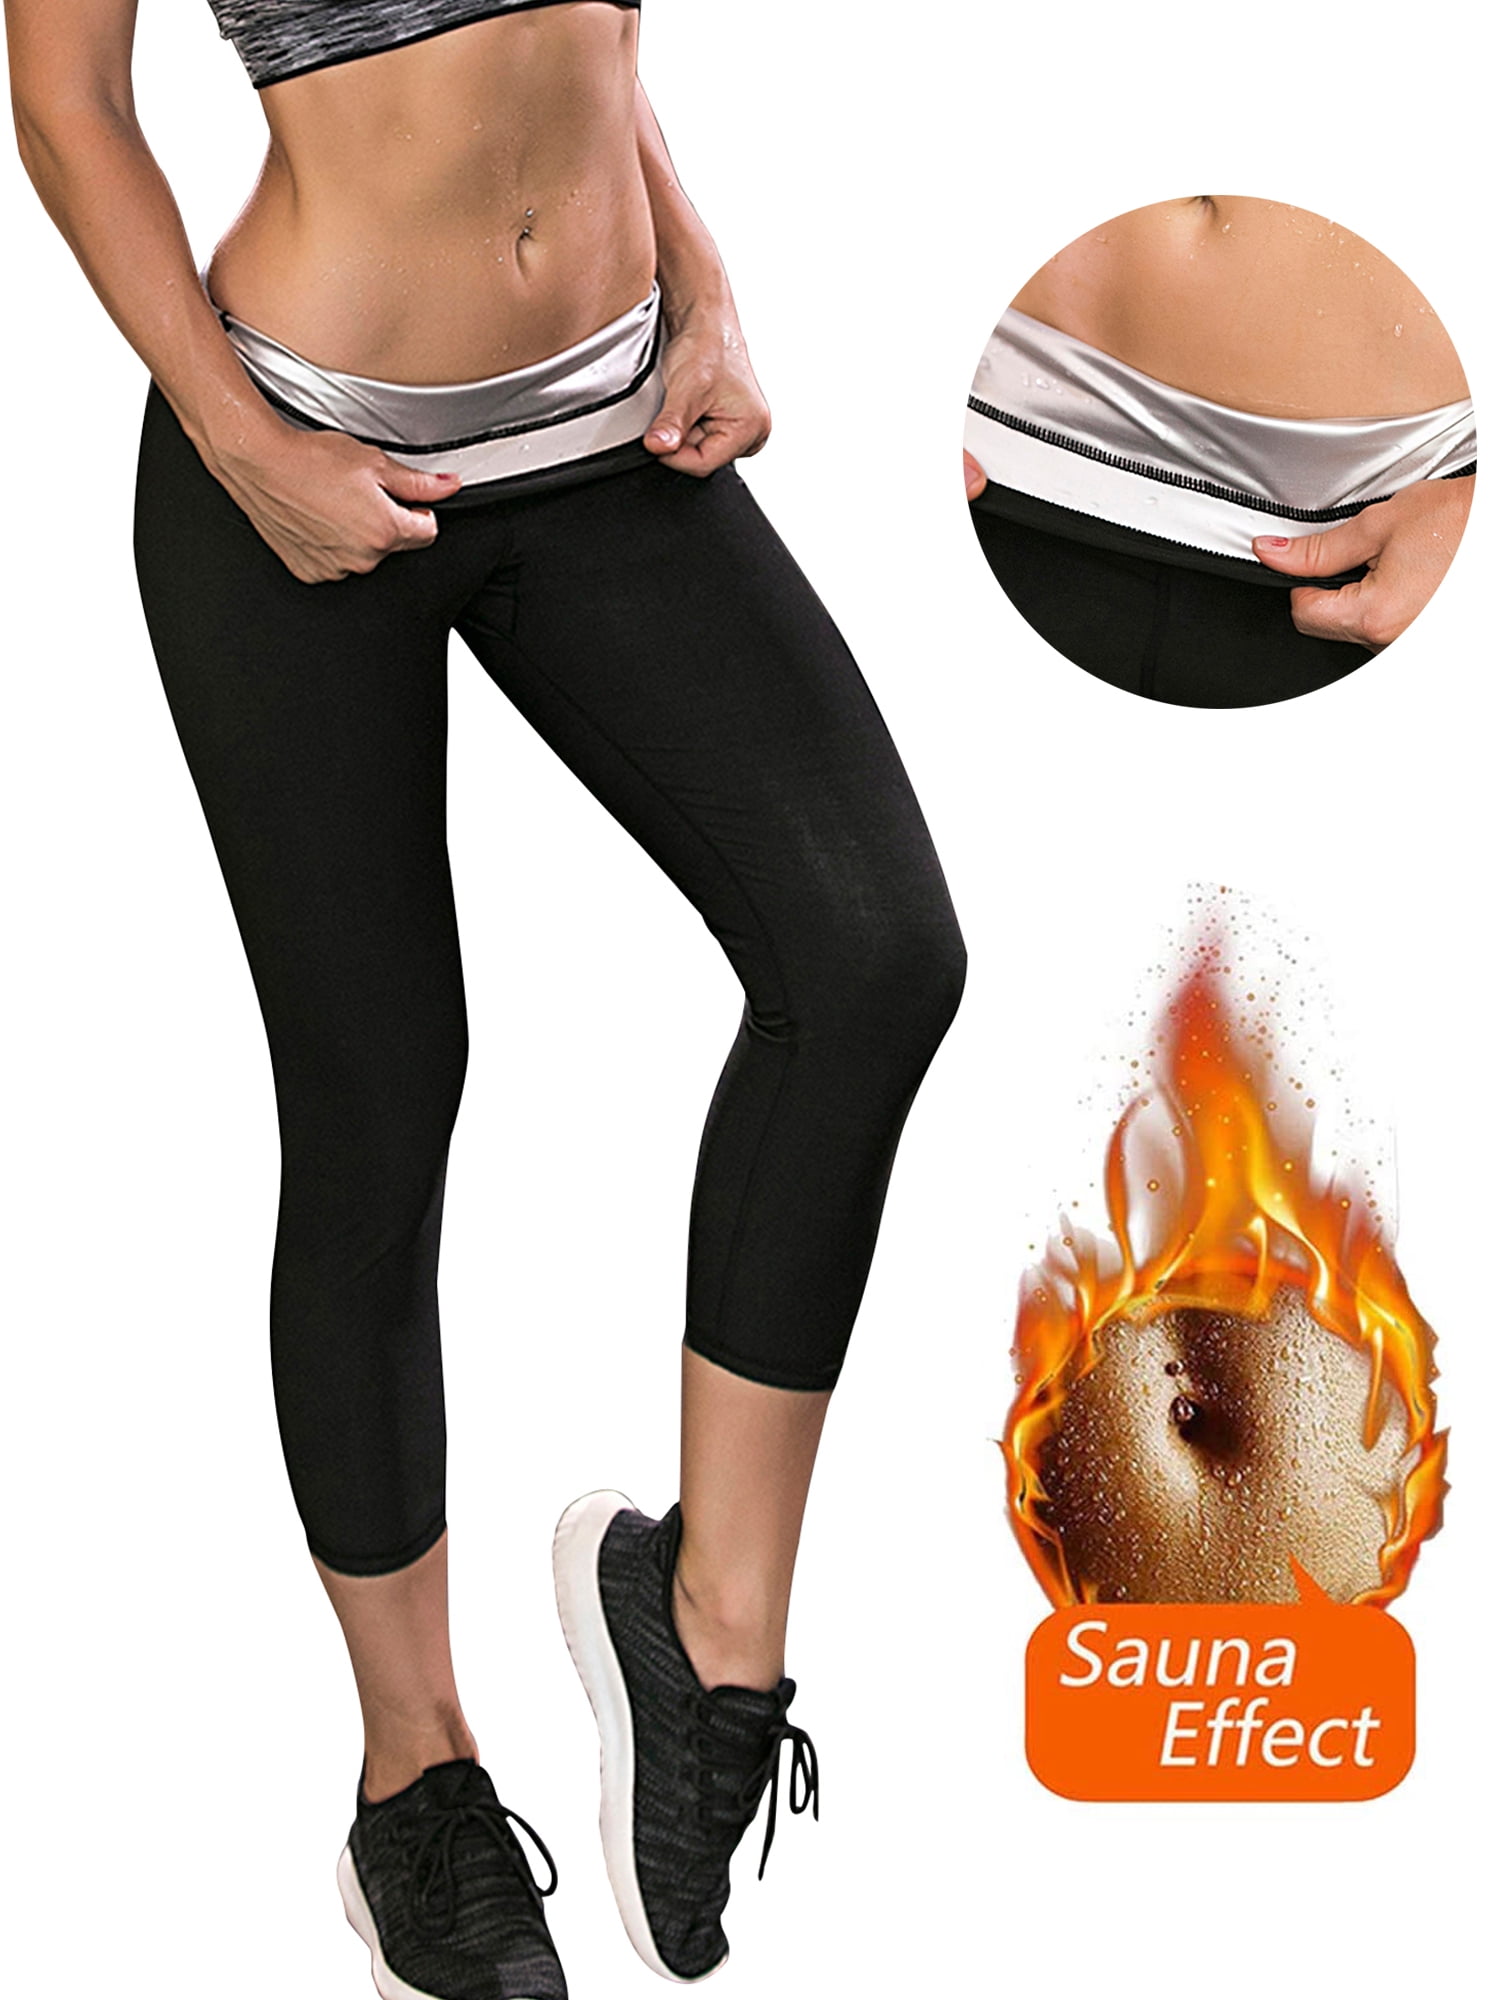 Tones and helps remove excess water for a firmer skin and a slimmer silhouette VEOFIT Slimming Sweat Pants Sauna Weight Loss Leggings 